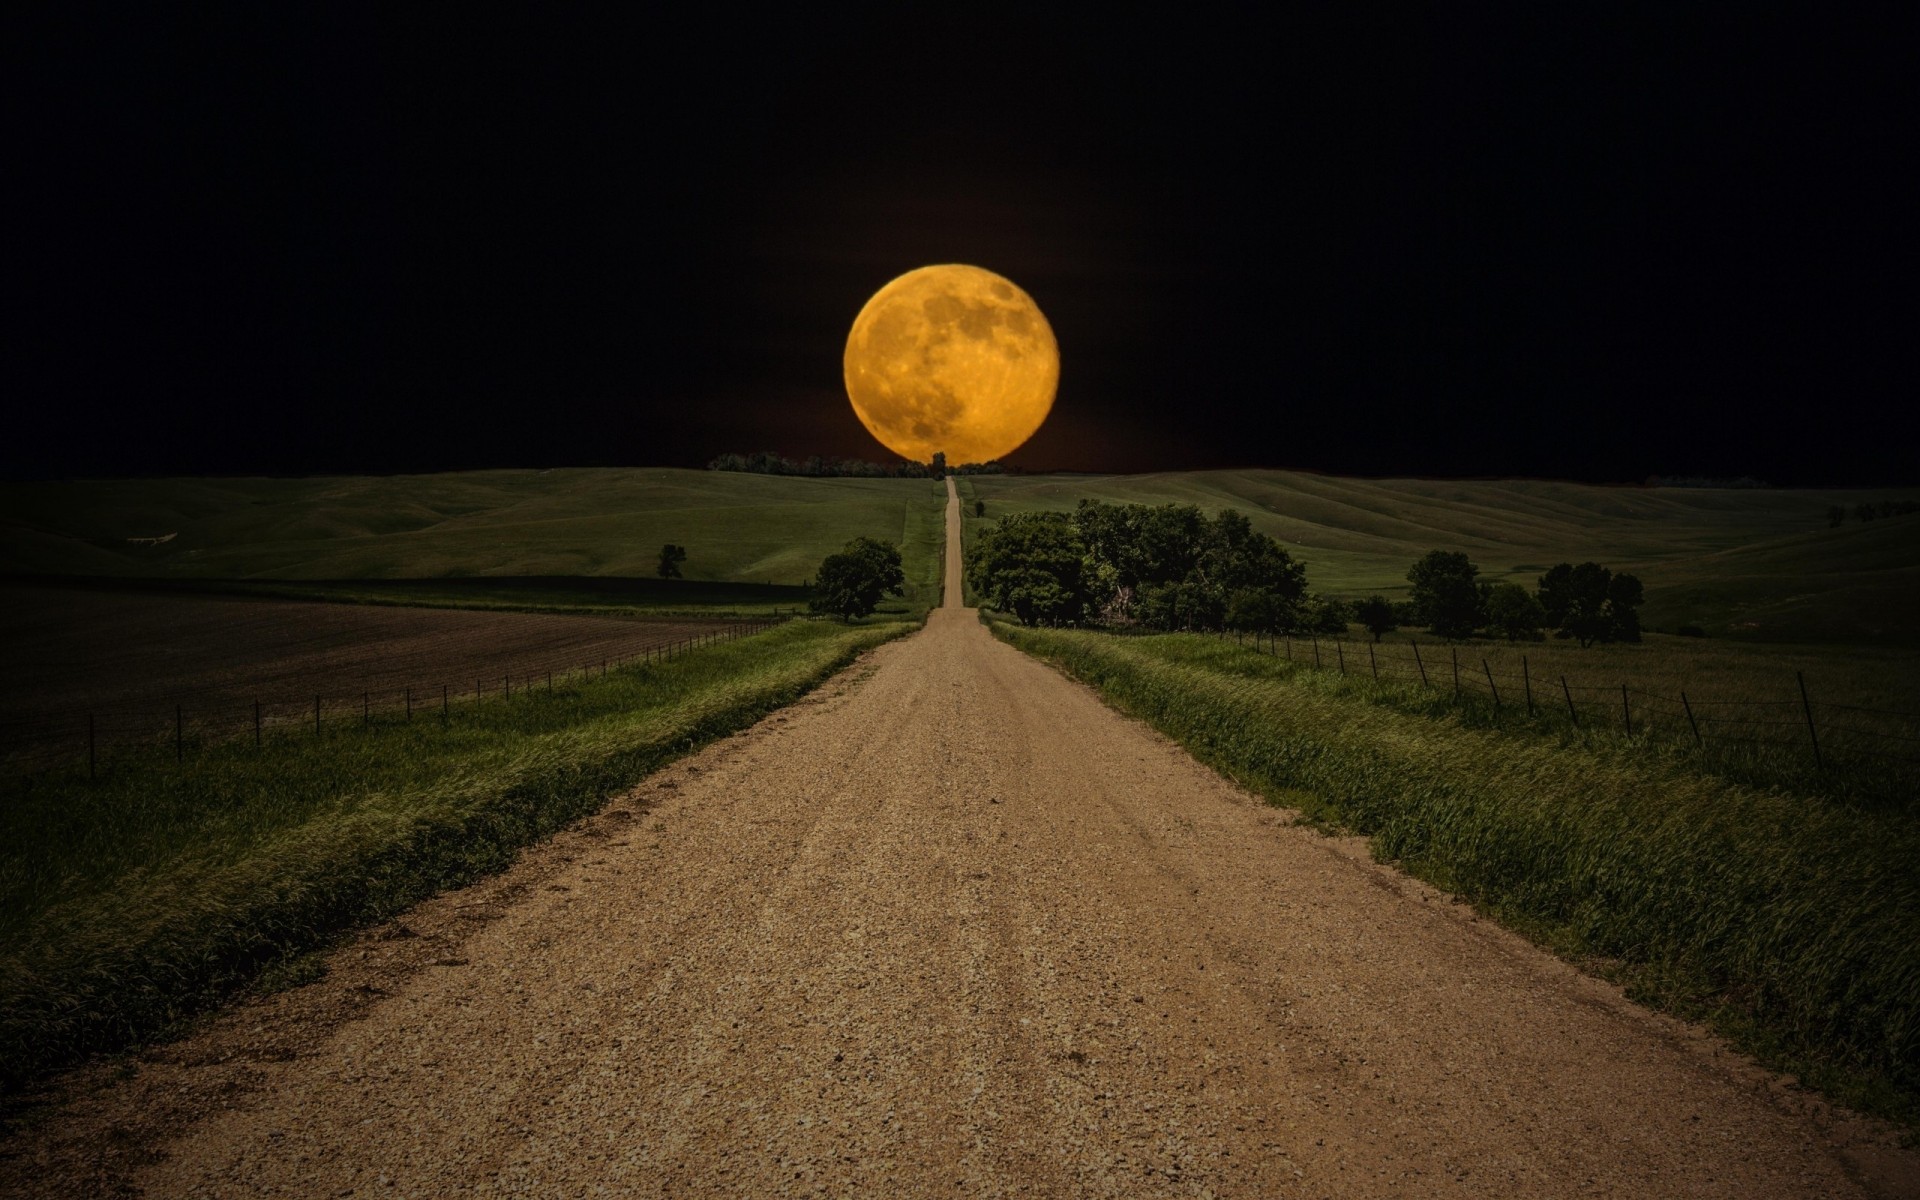 landscapes sky road landscape travel outdoors sunset nature dusk evening countryside moon full moon yellow moon night